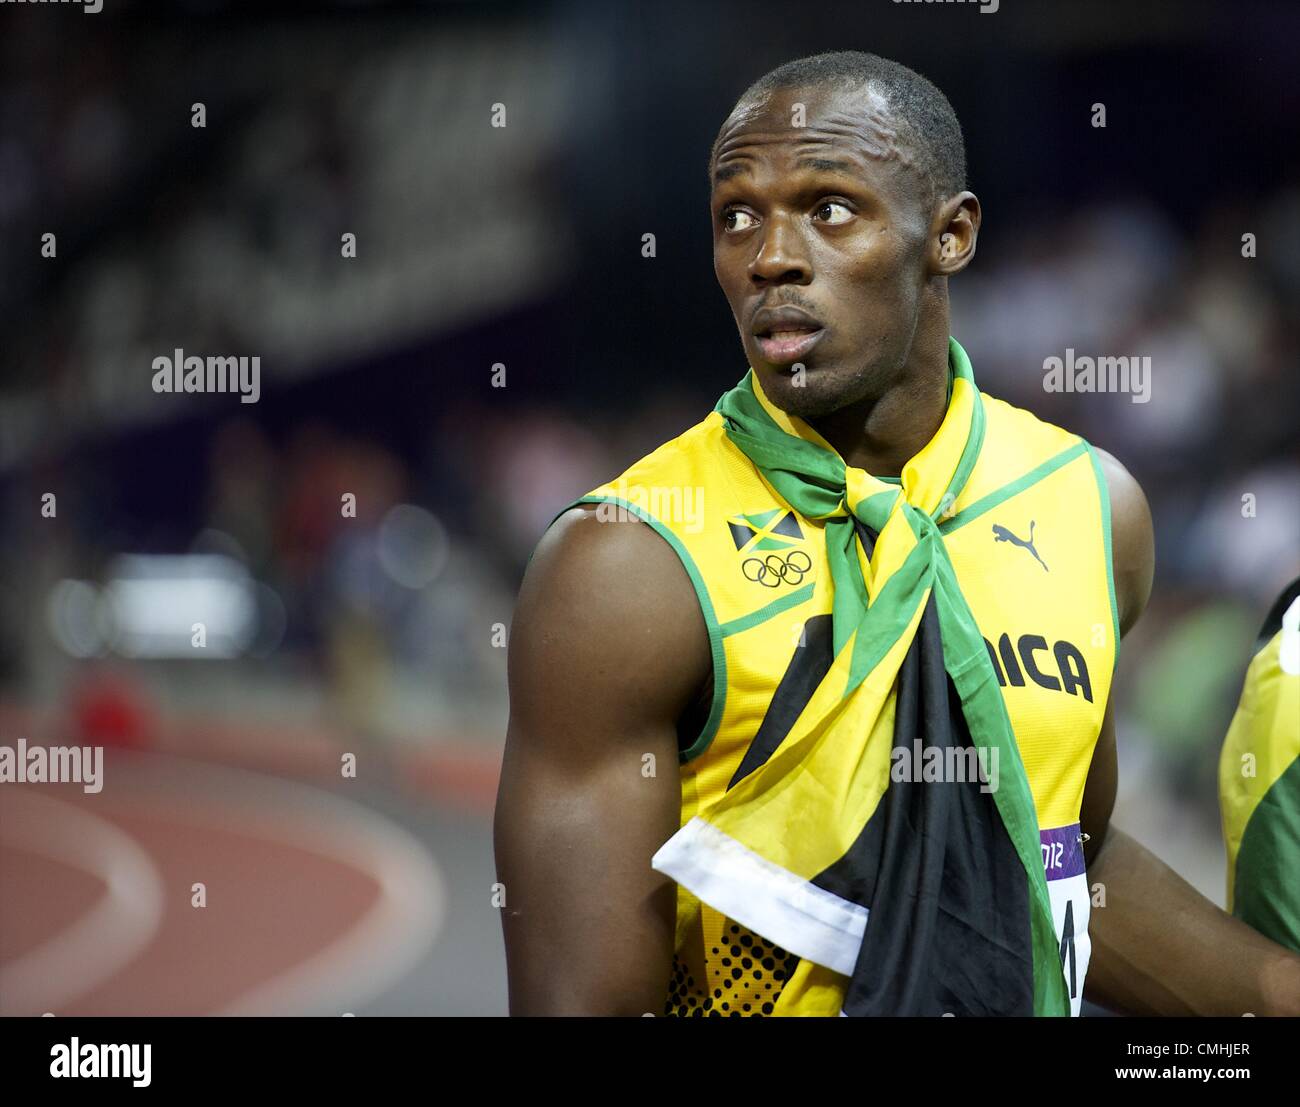 Aug. 11, 2012 - London, England, United Kingdom - USAIN BOLT stares towards the track infield as the Jamaican 4x100m relay team is interviewed by the media after winning gold and setting a new world record of 36.84 seconds during the 2012 London Summer Olympics. (Credit Image: © Mark Makela/ZUMAPRESS.com) Stock Photo